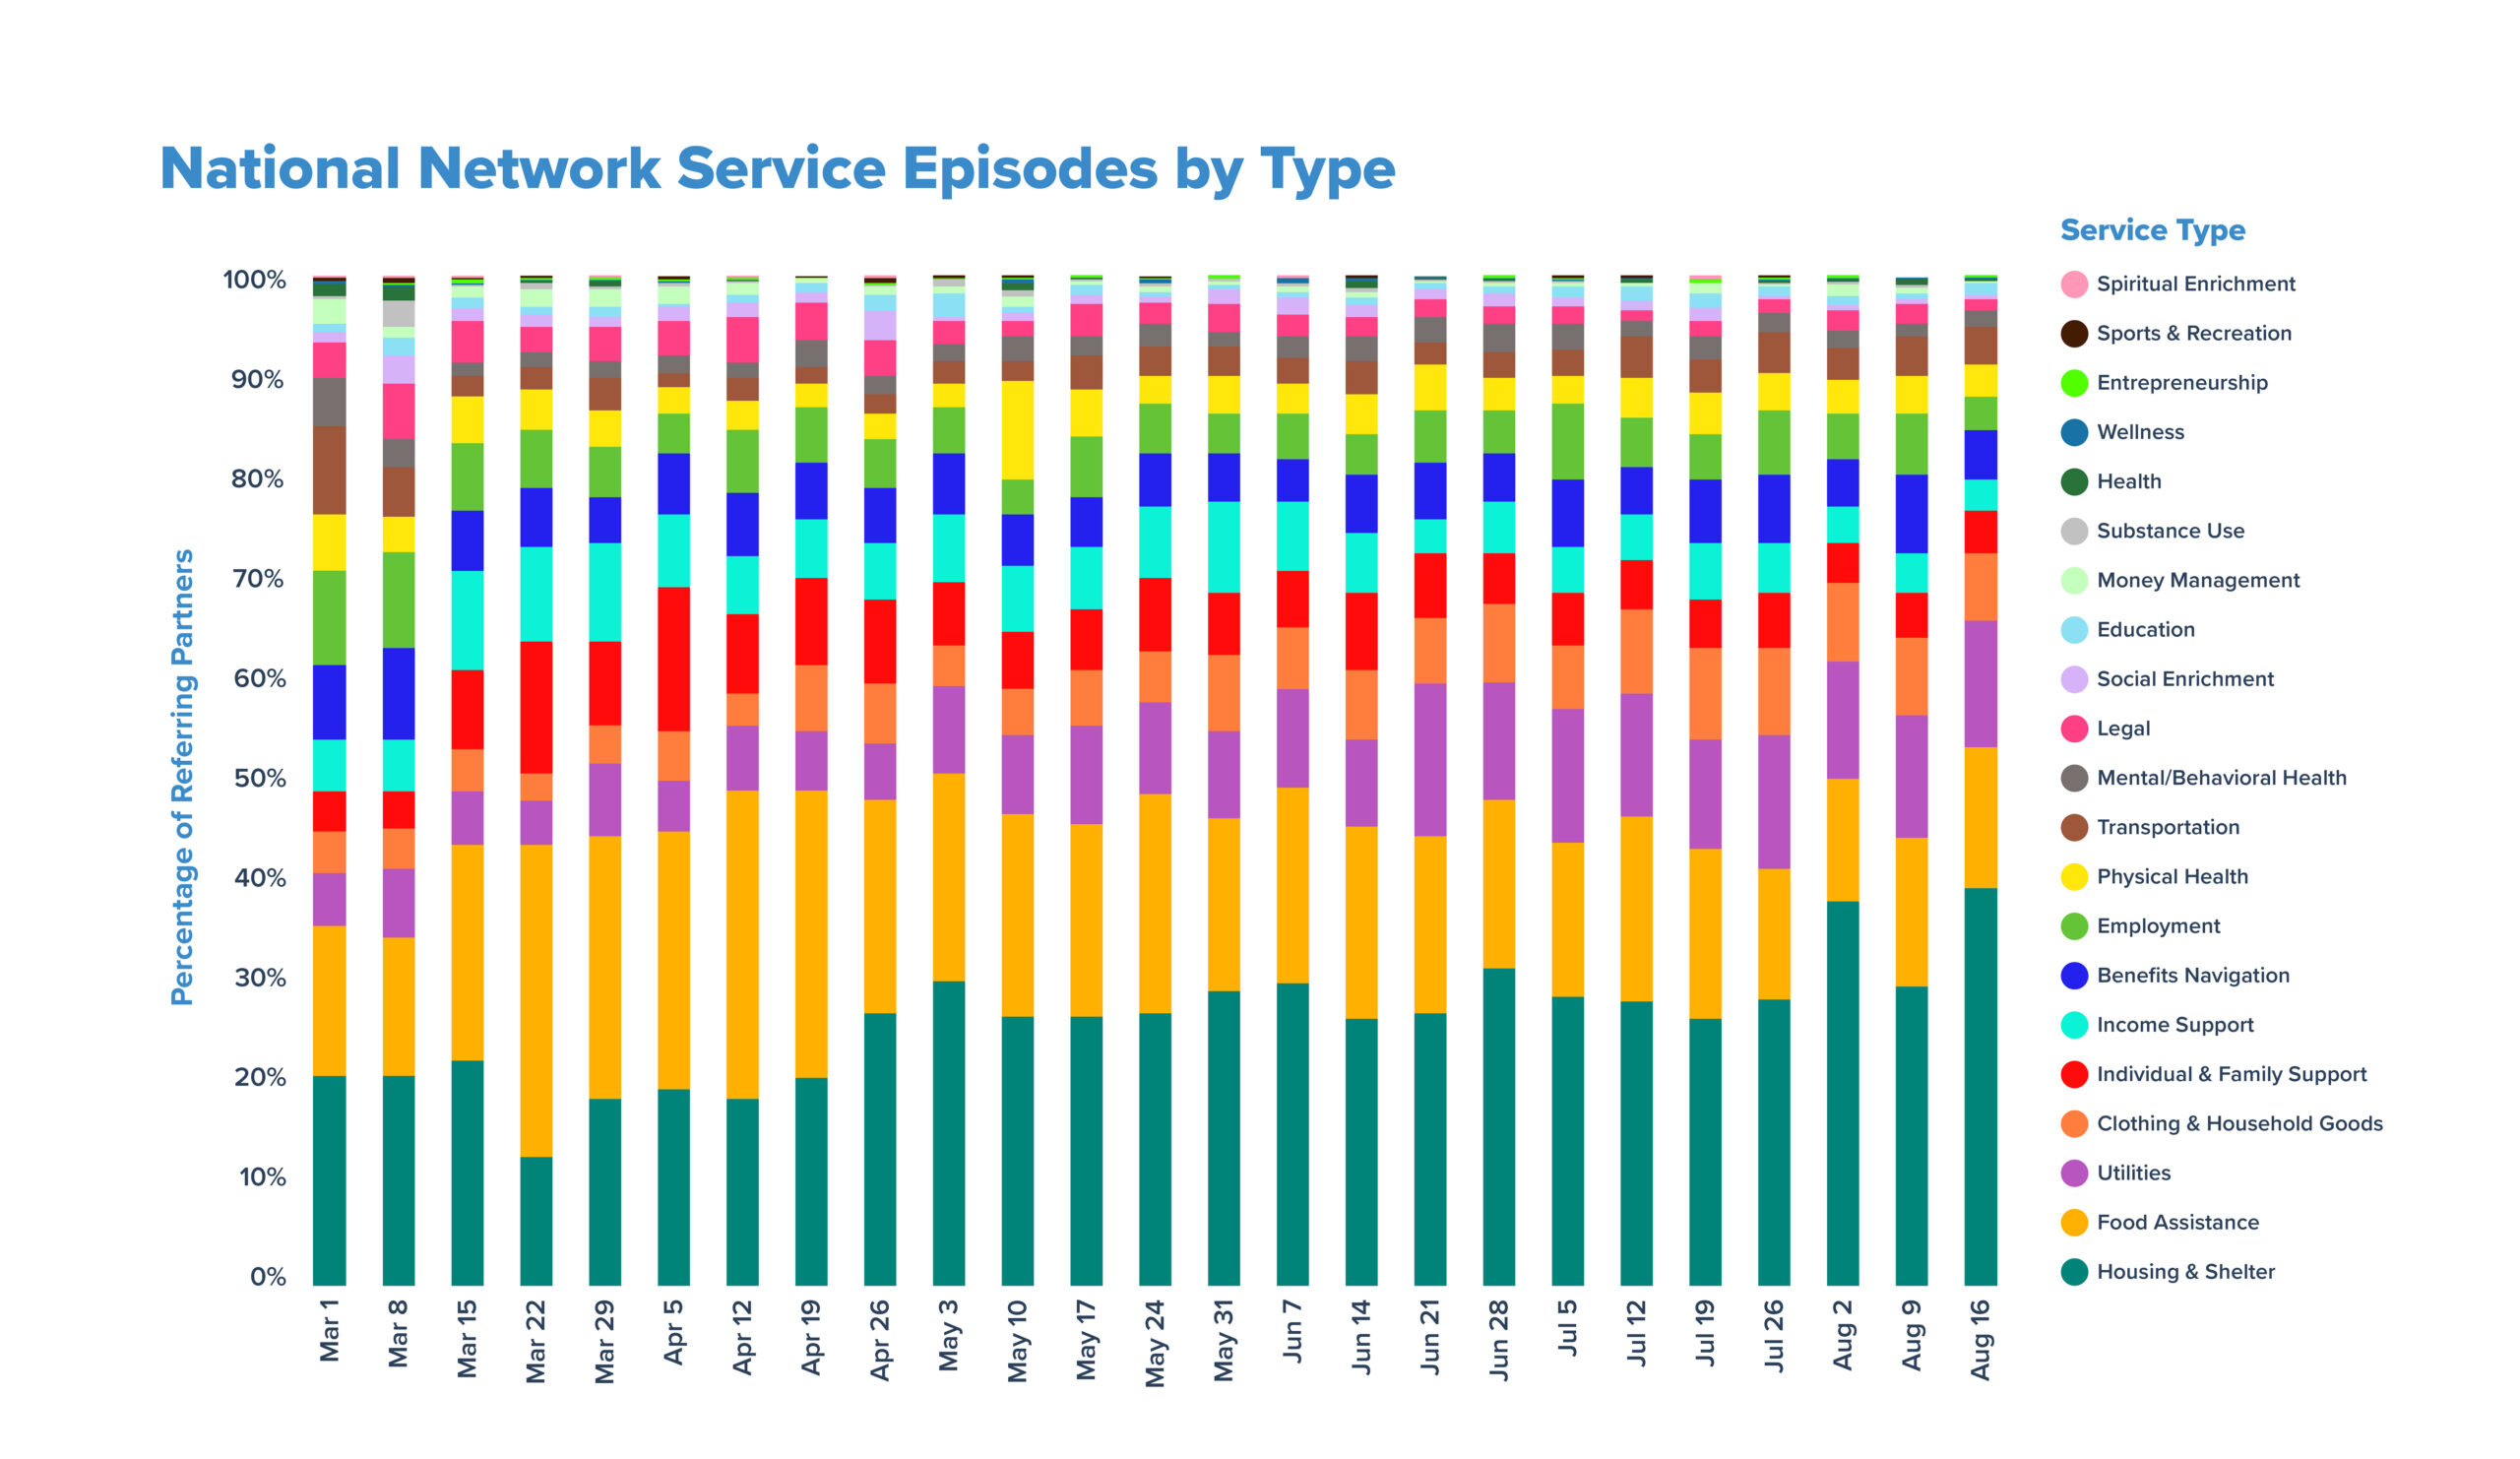 National Network Service Episodes by Type